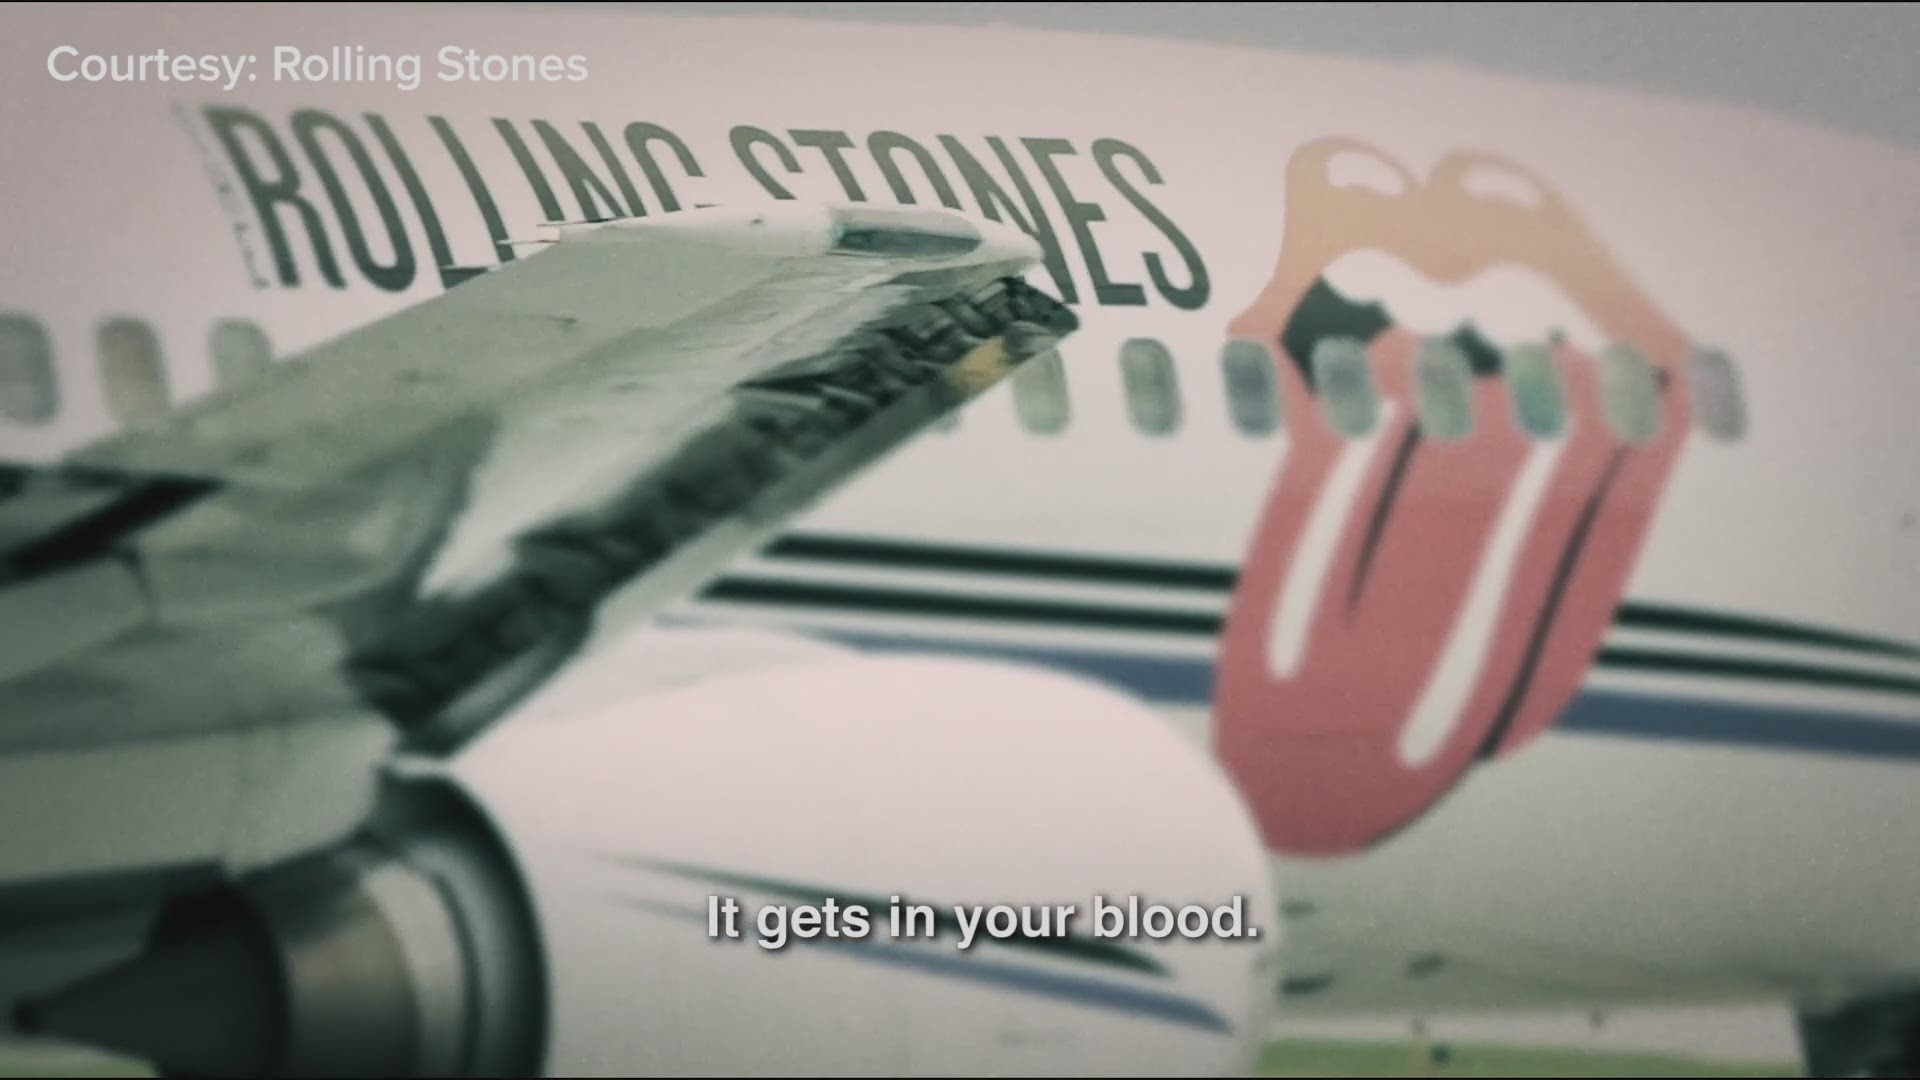 Stones fans can't always get what they want, but this tour might give them what they need.